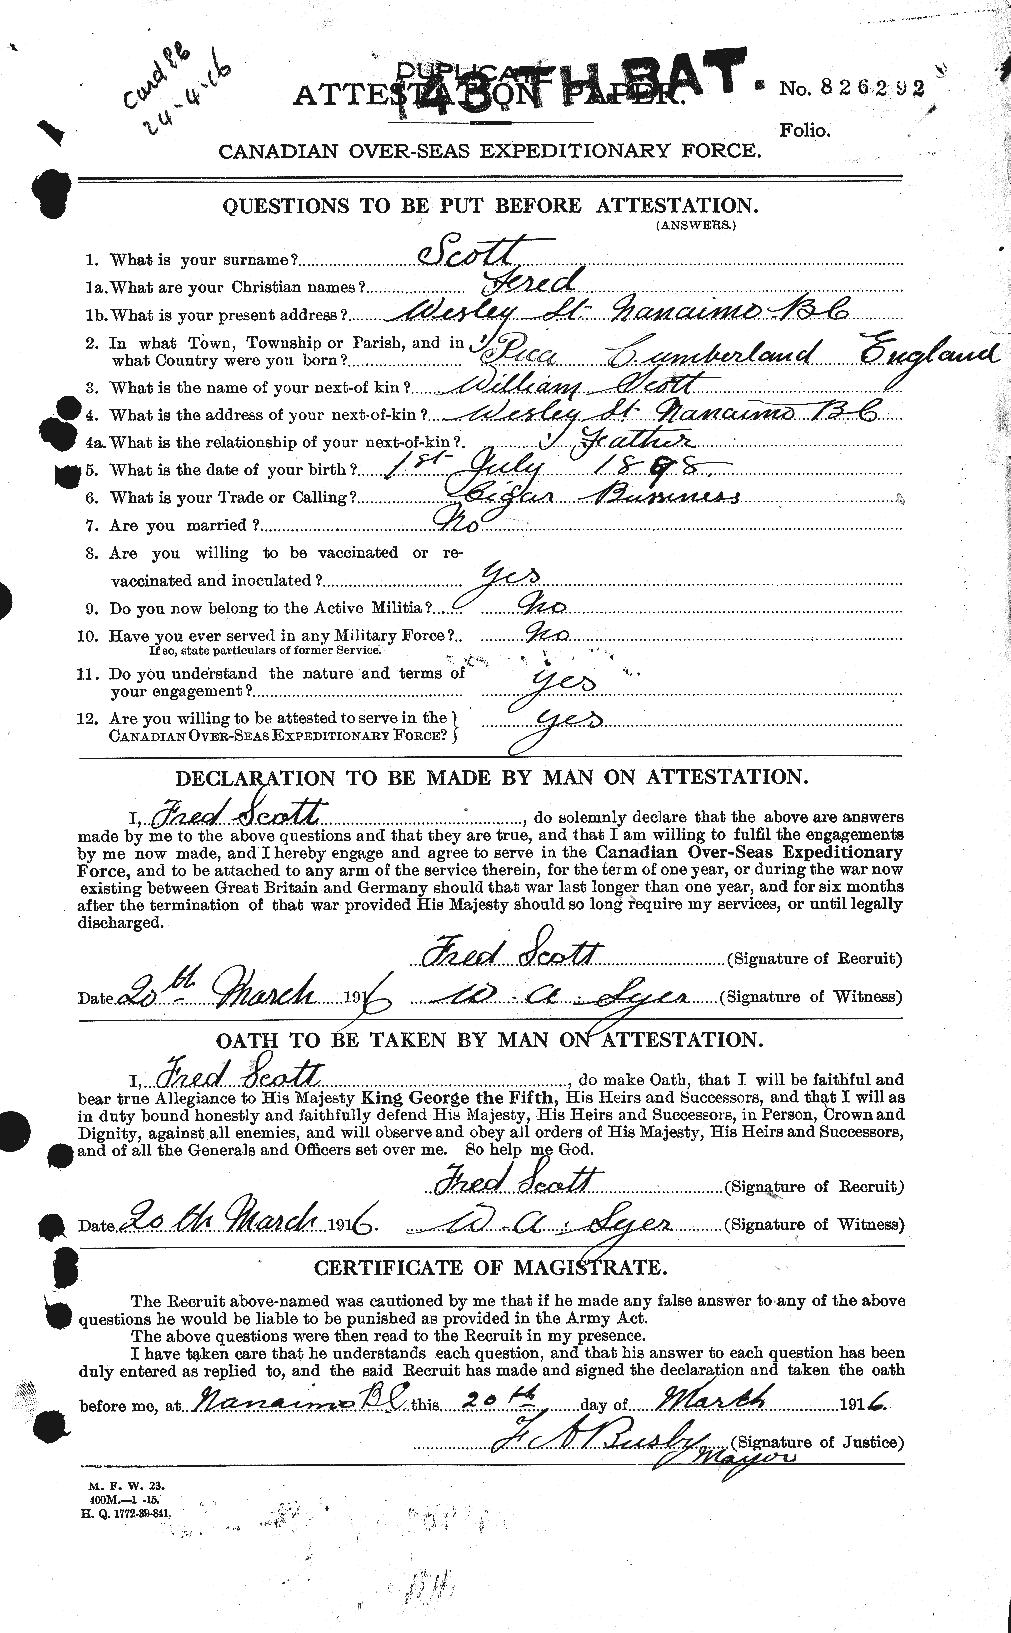 Personnel Records of the First World War - CEF 084681a